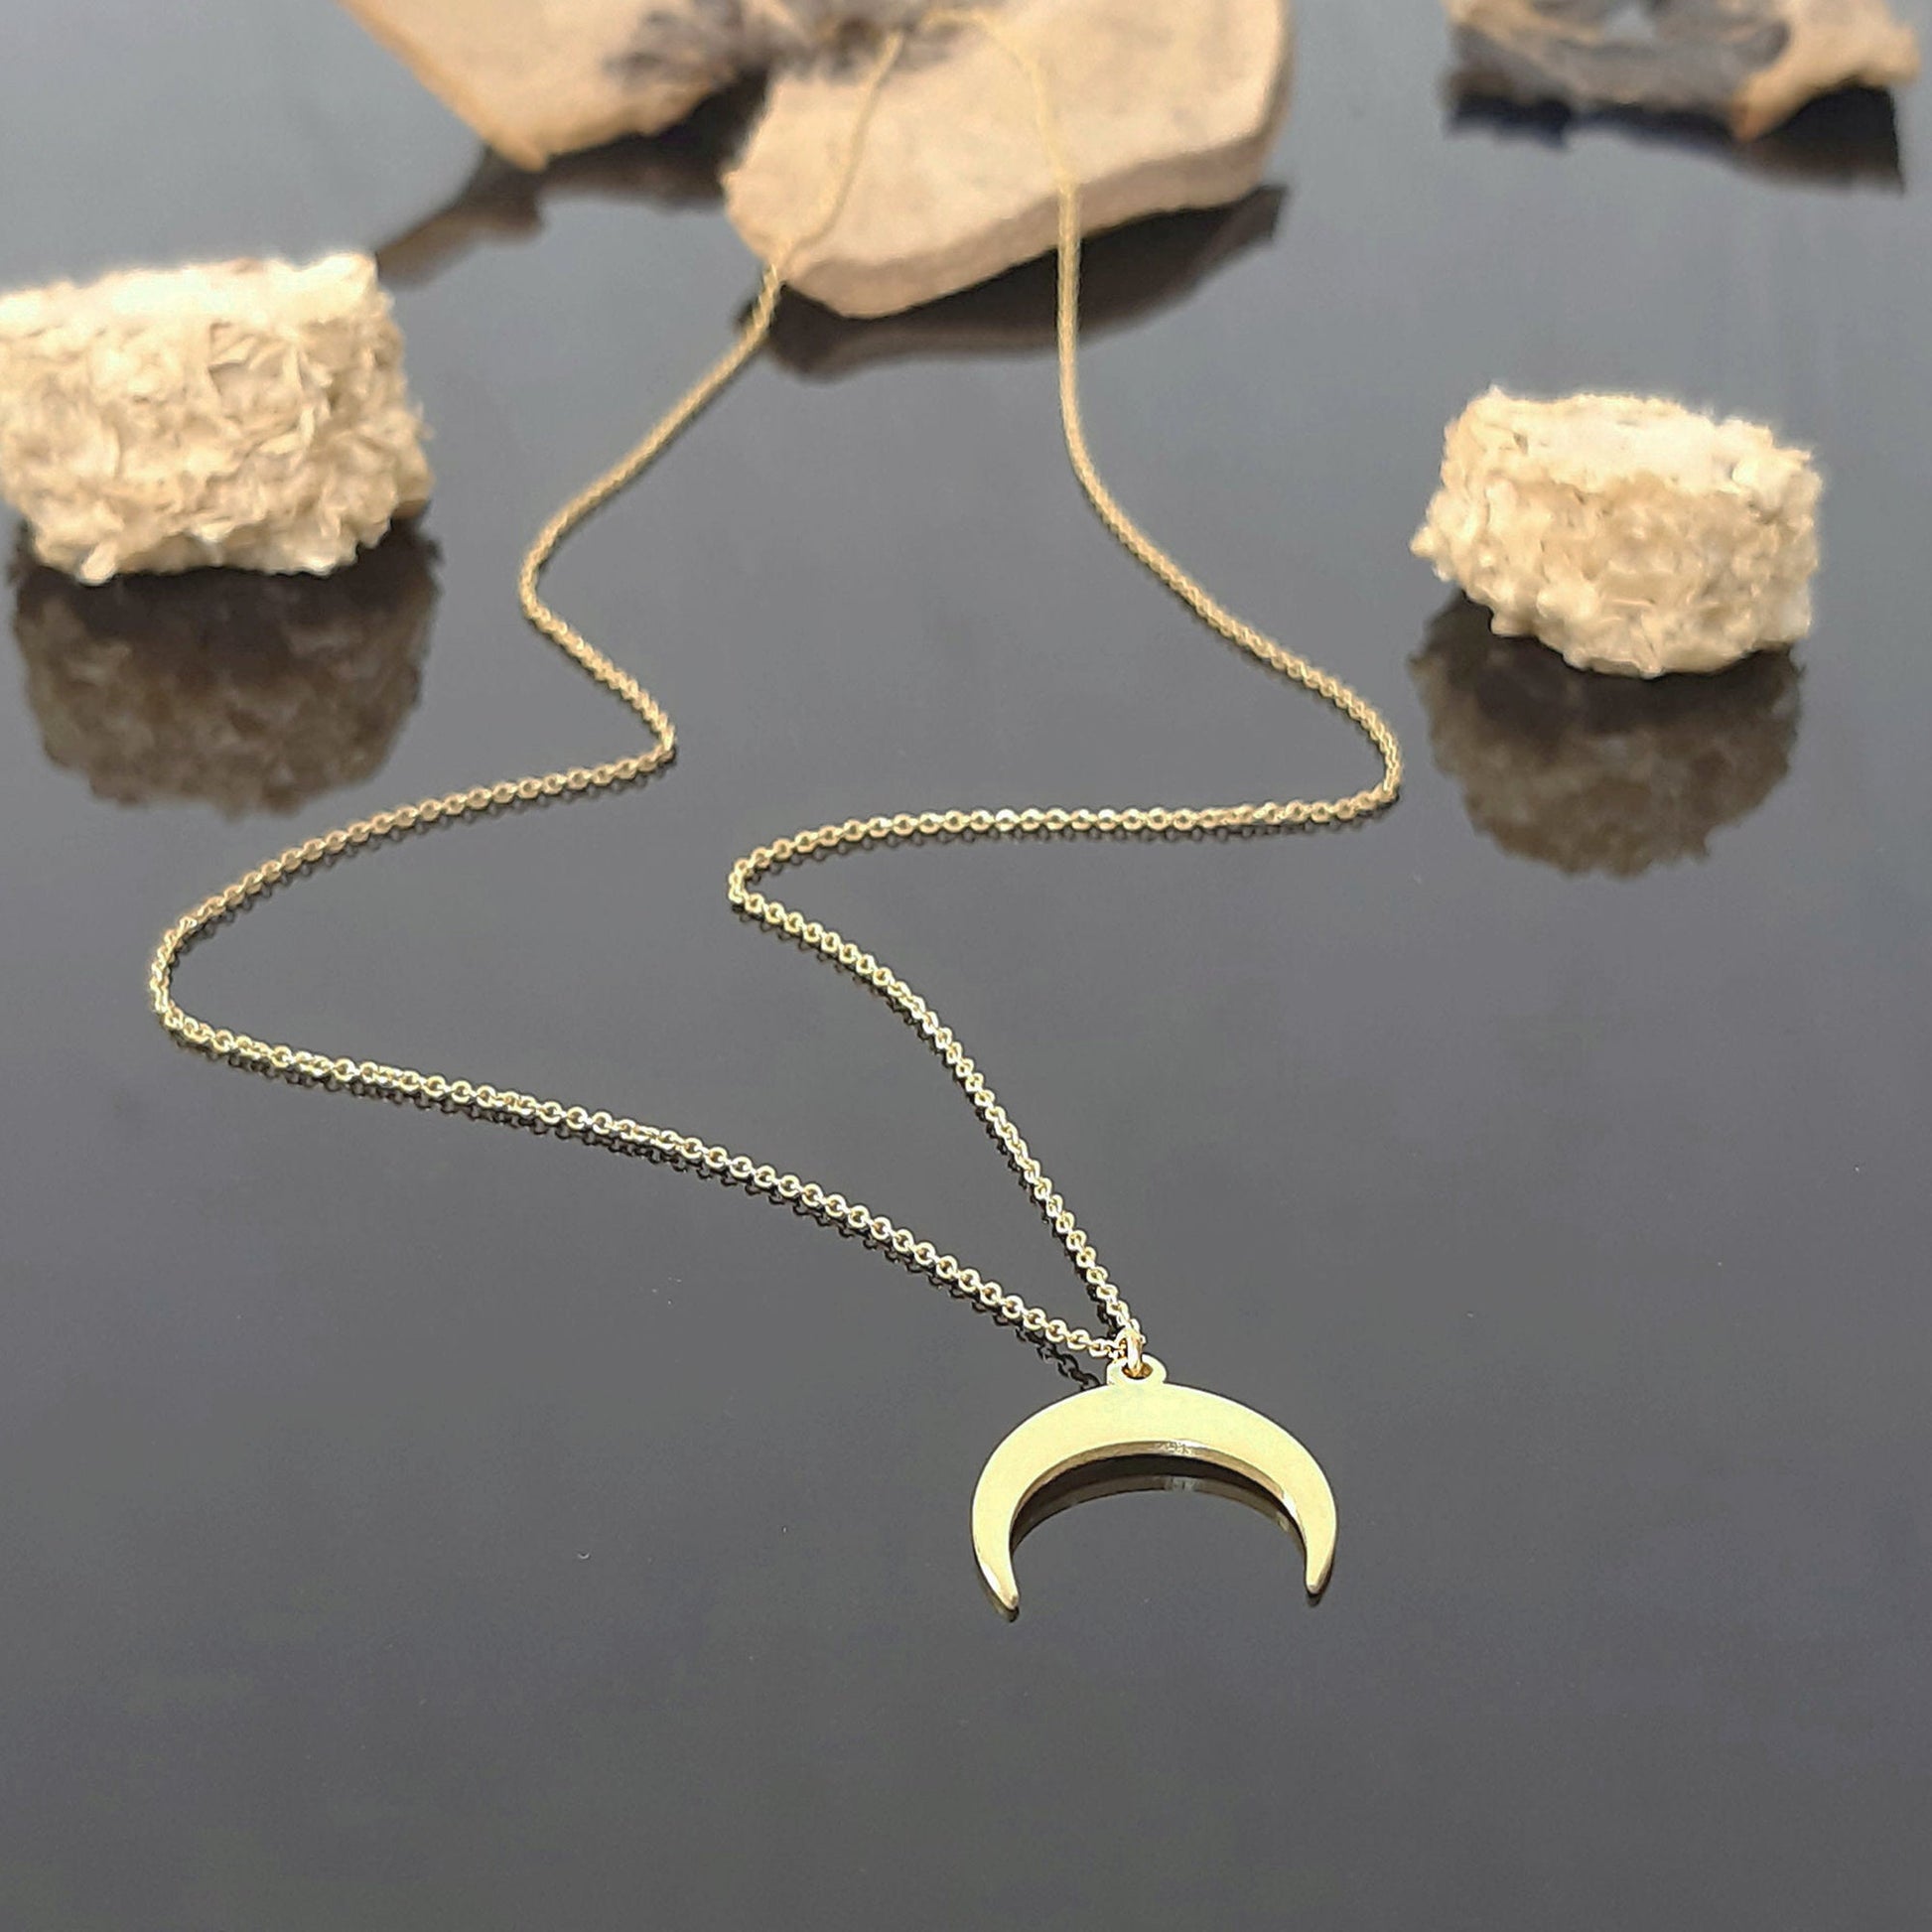 Crescent Moon Necklace, Tusk Necklace, Upside Down Moon Necklace, Double  Horn Necklace, Half Moon Necklace